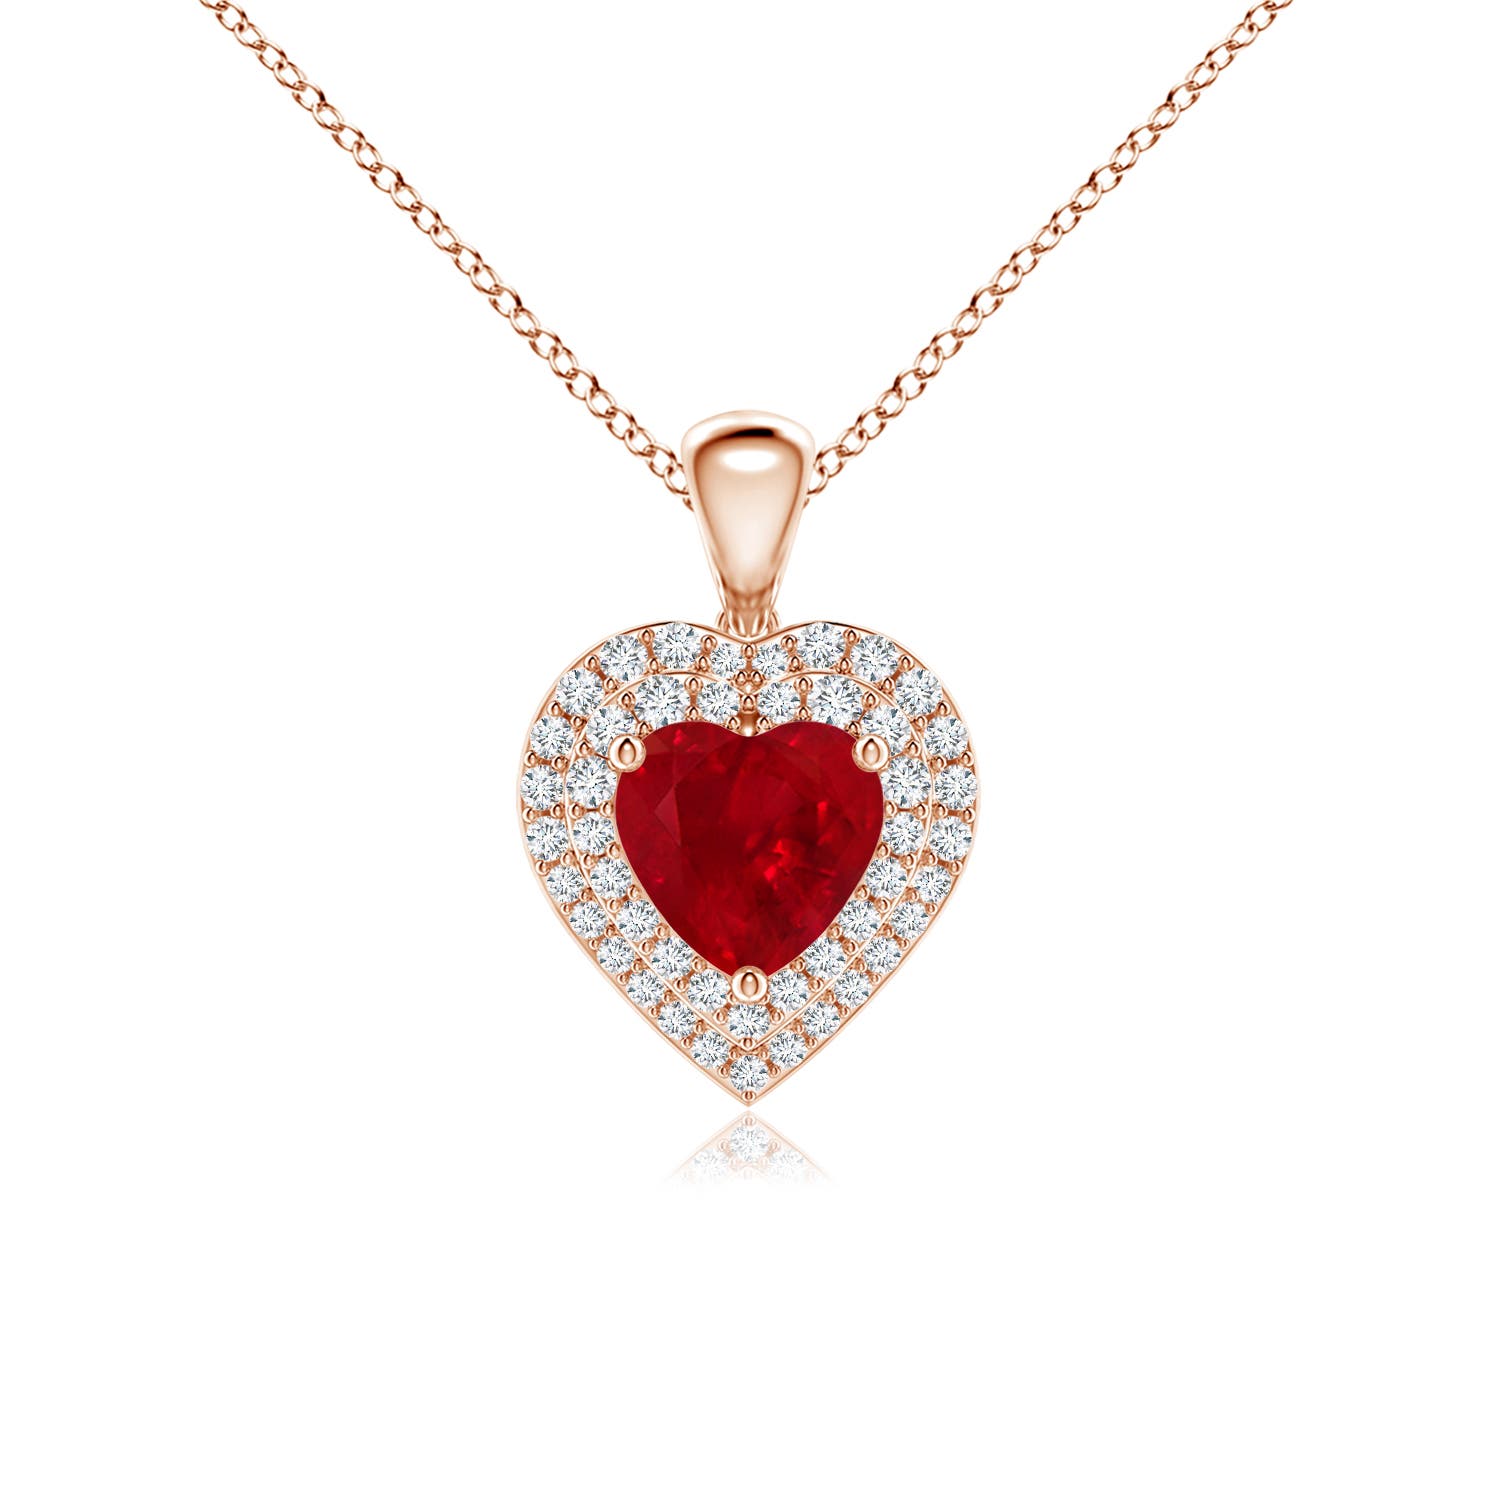 AAA - Ruby / 1.25 CT / 14 KT Rose Gold